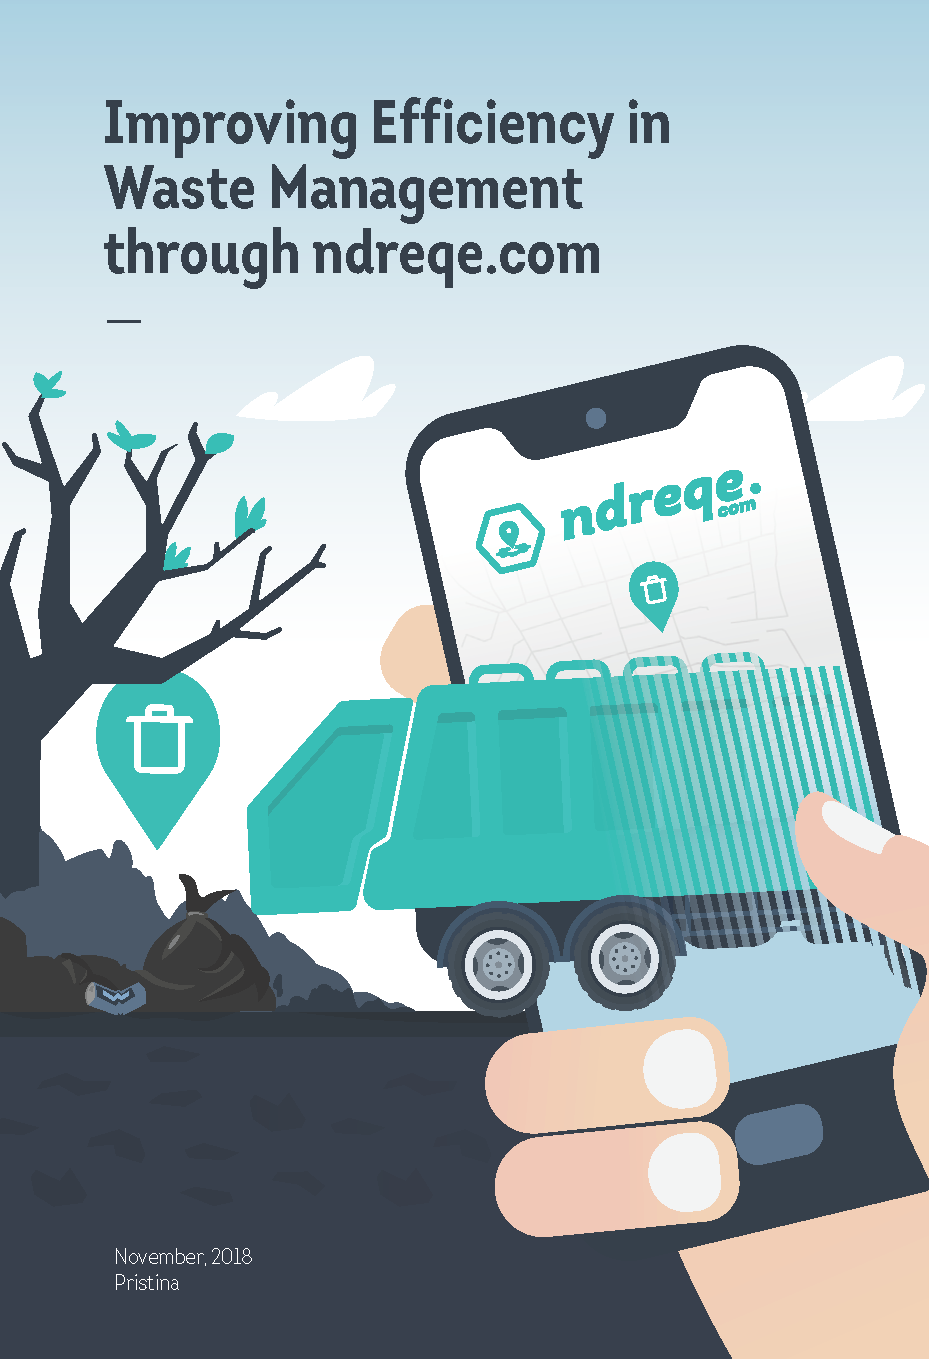 Improving Efficiency in Waste Management through ndreqe.com